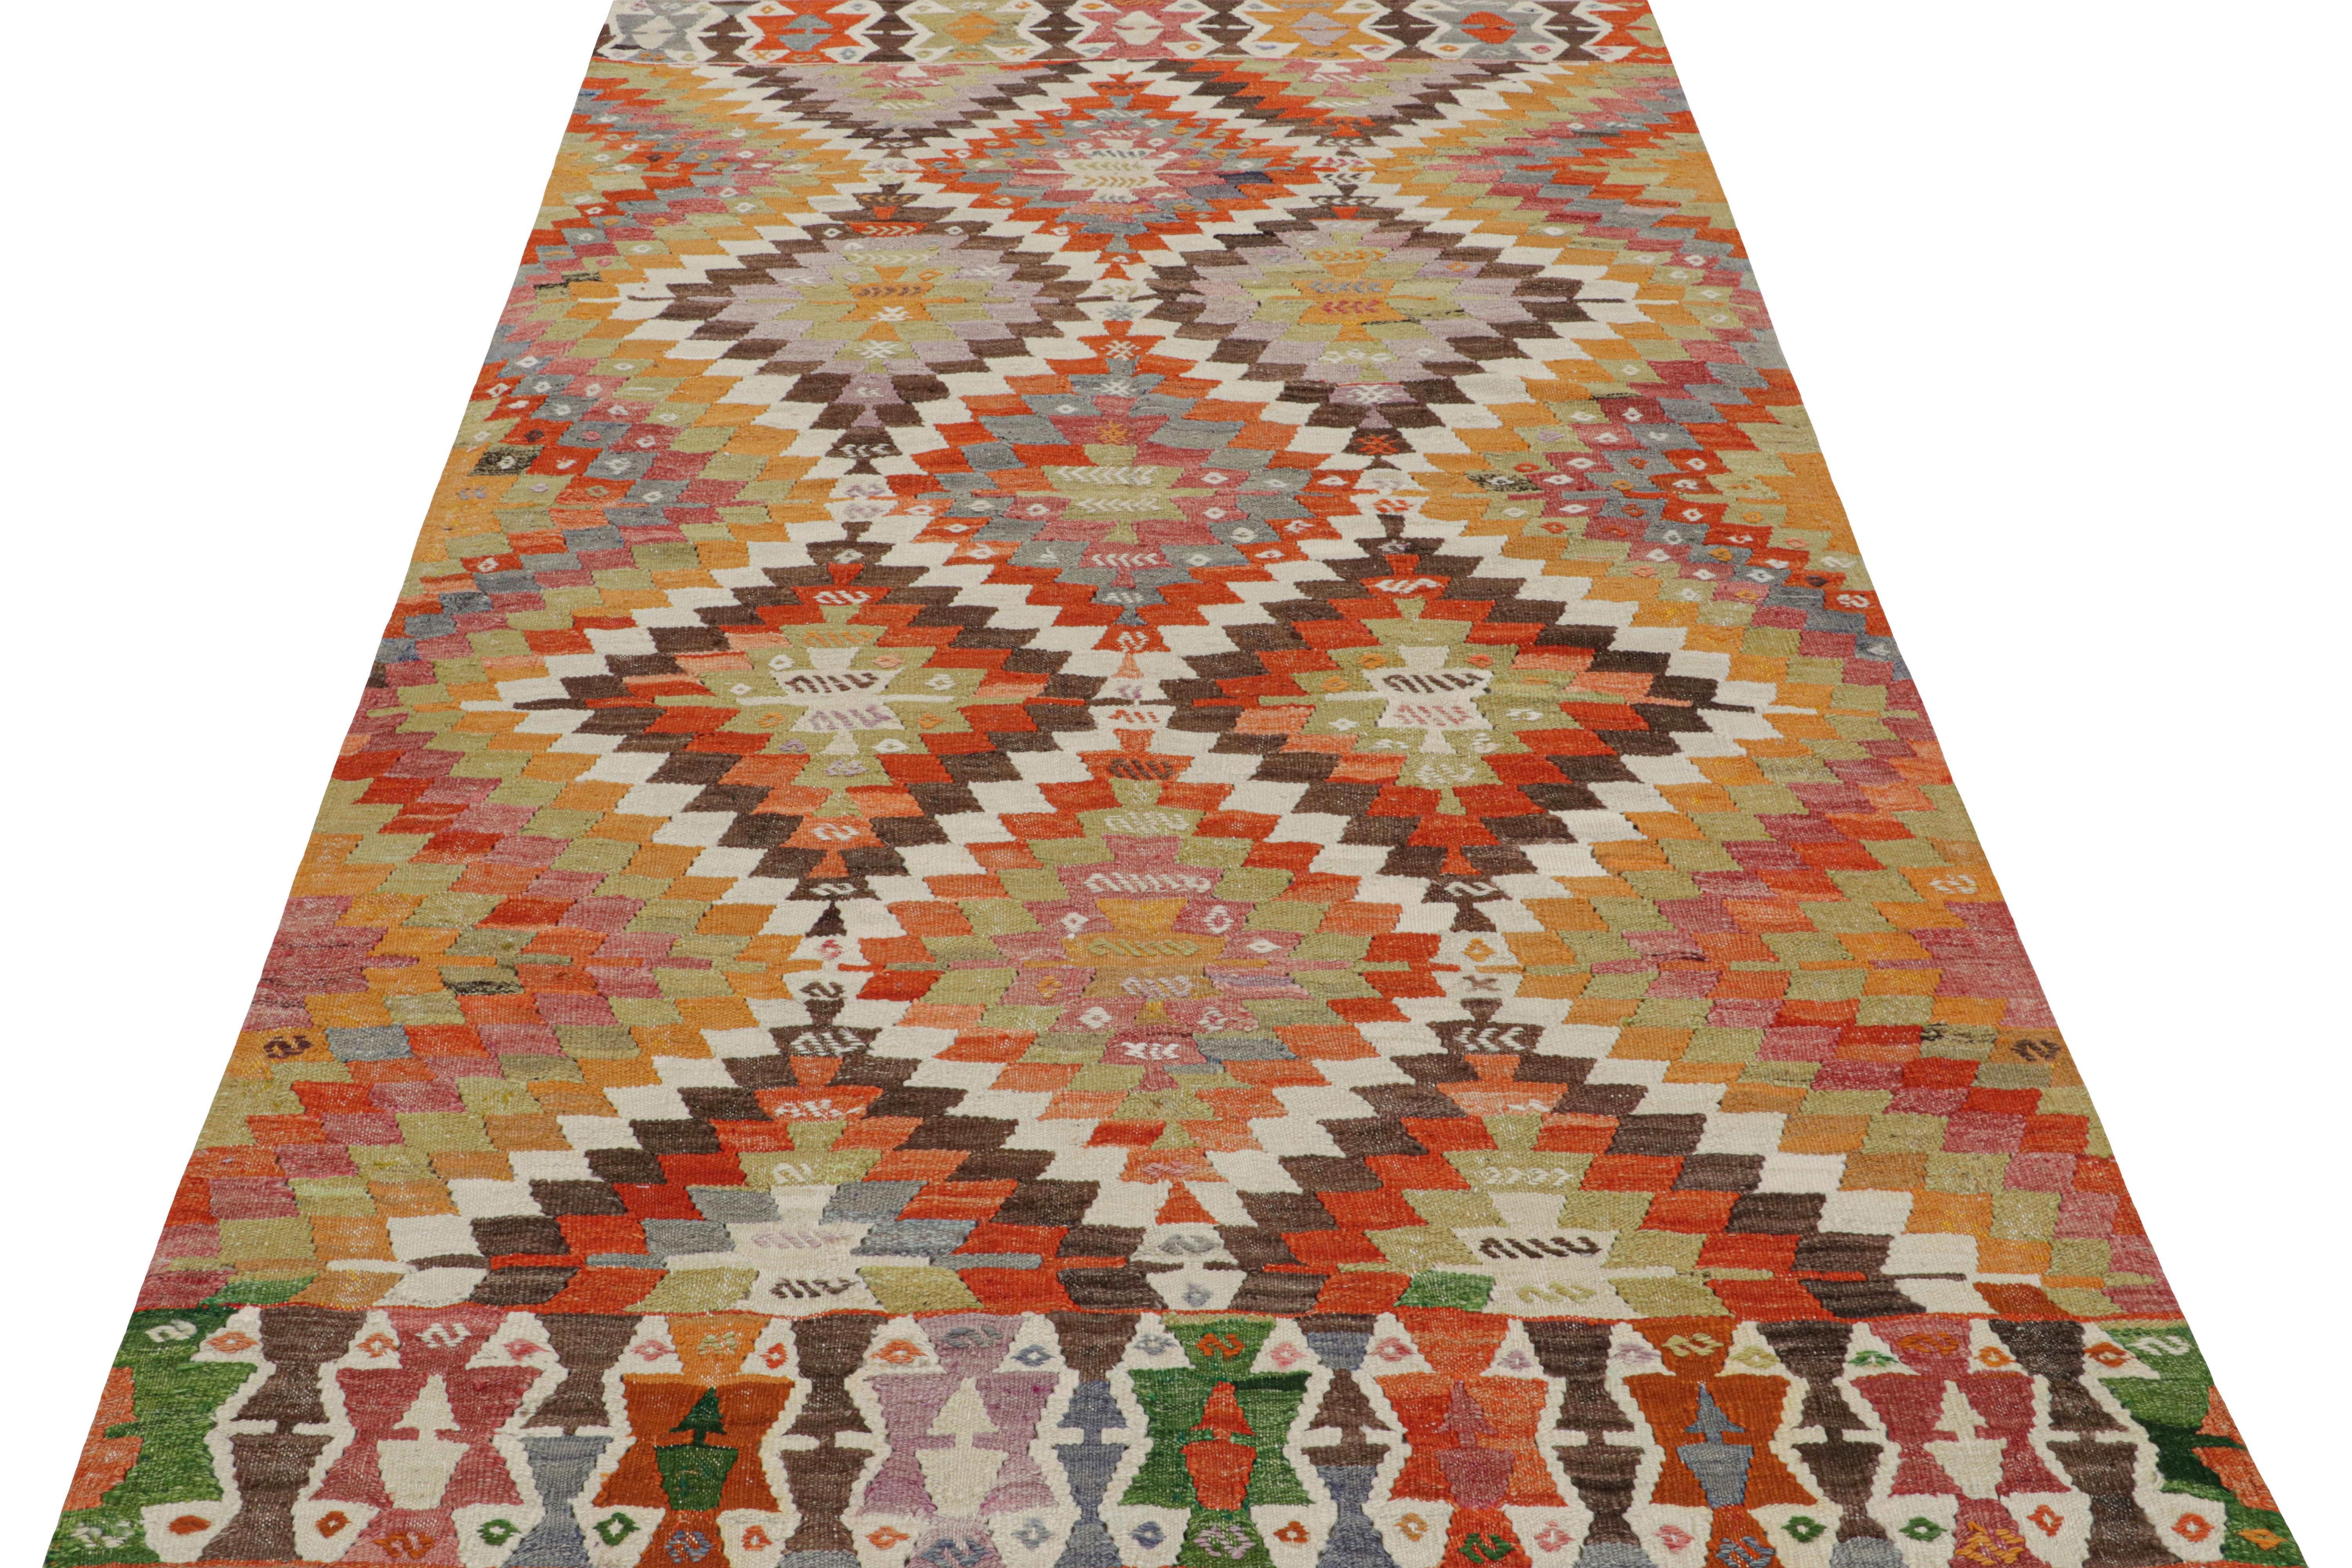 Vintage Midcentury Diamond Yellow Multi-Color Wool Kilim Rug by Rug & Kilim In Good Condition For Sale In Long Island City, NY